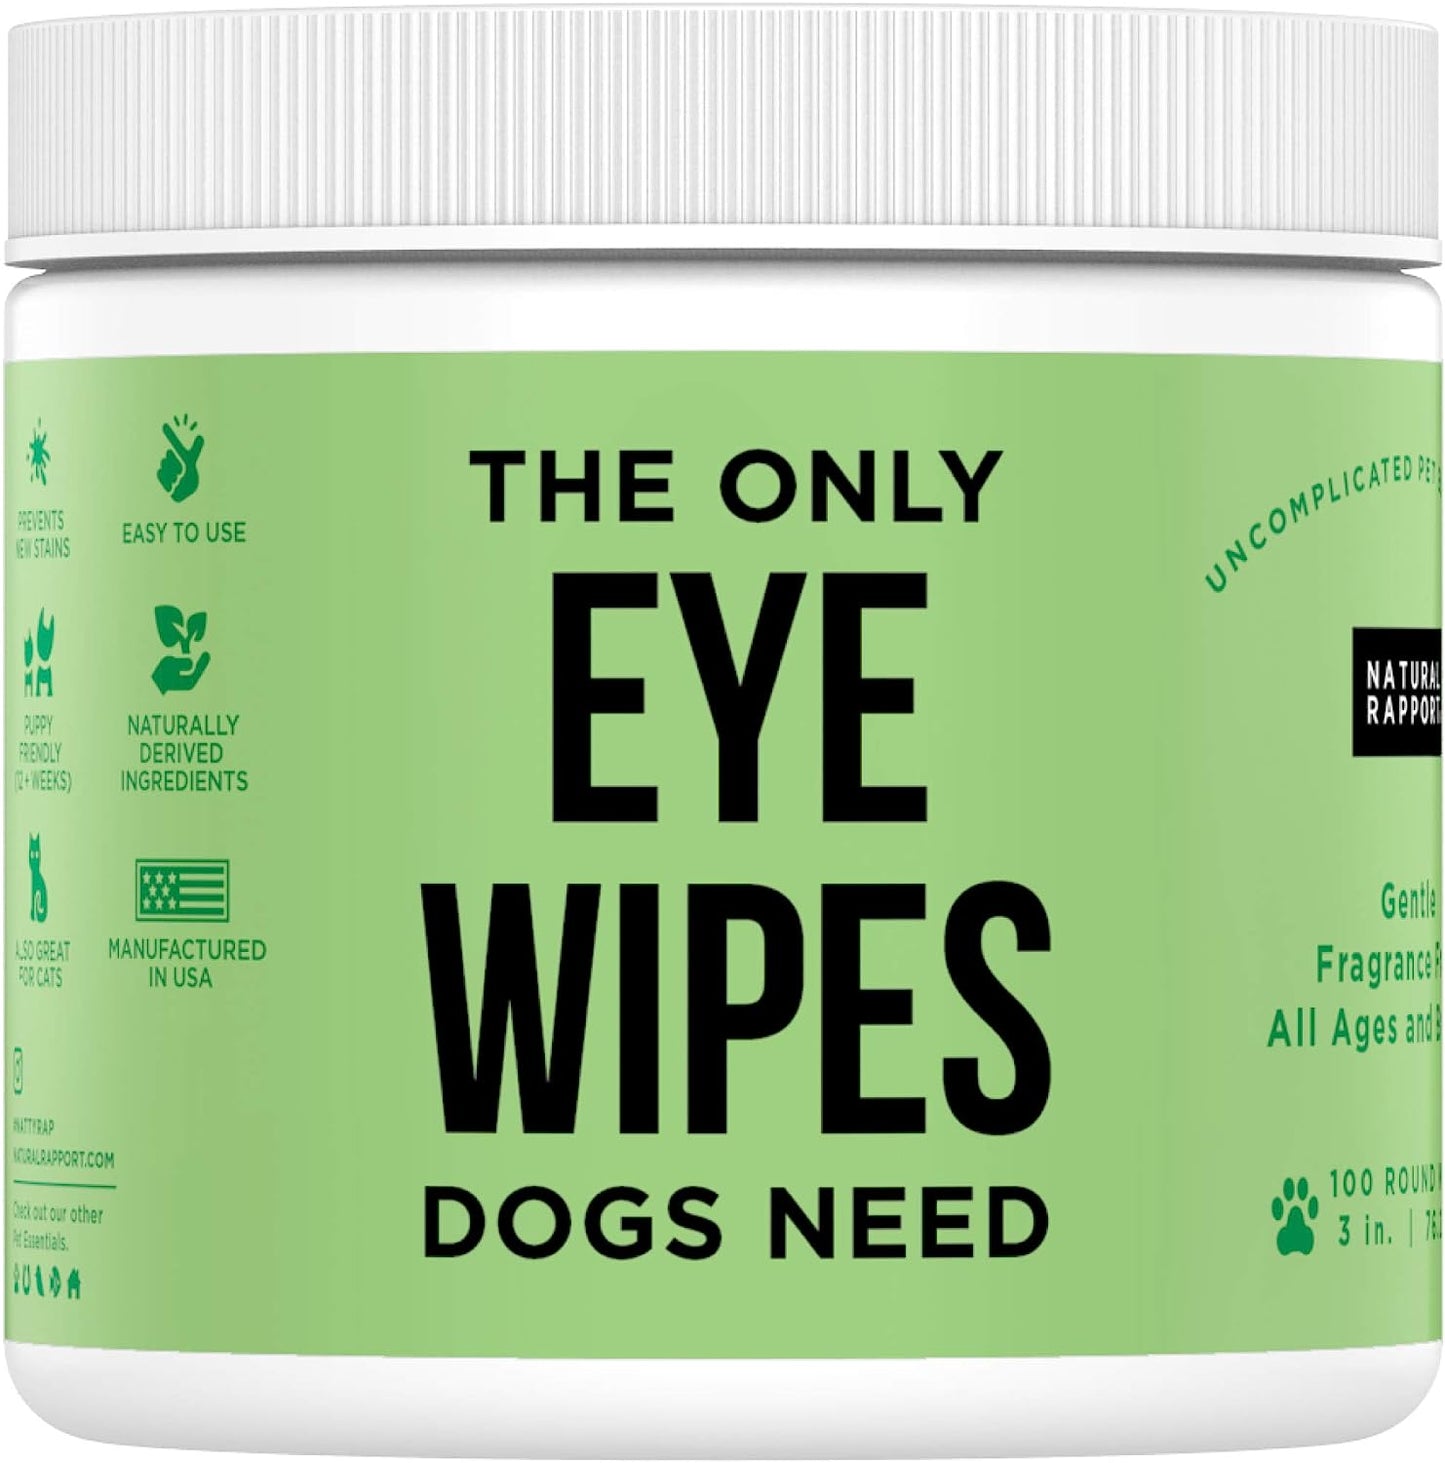 Natural Rapport The Only Eye Wipes Dogs Need